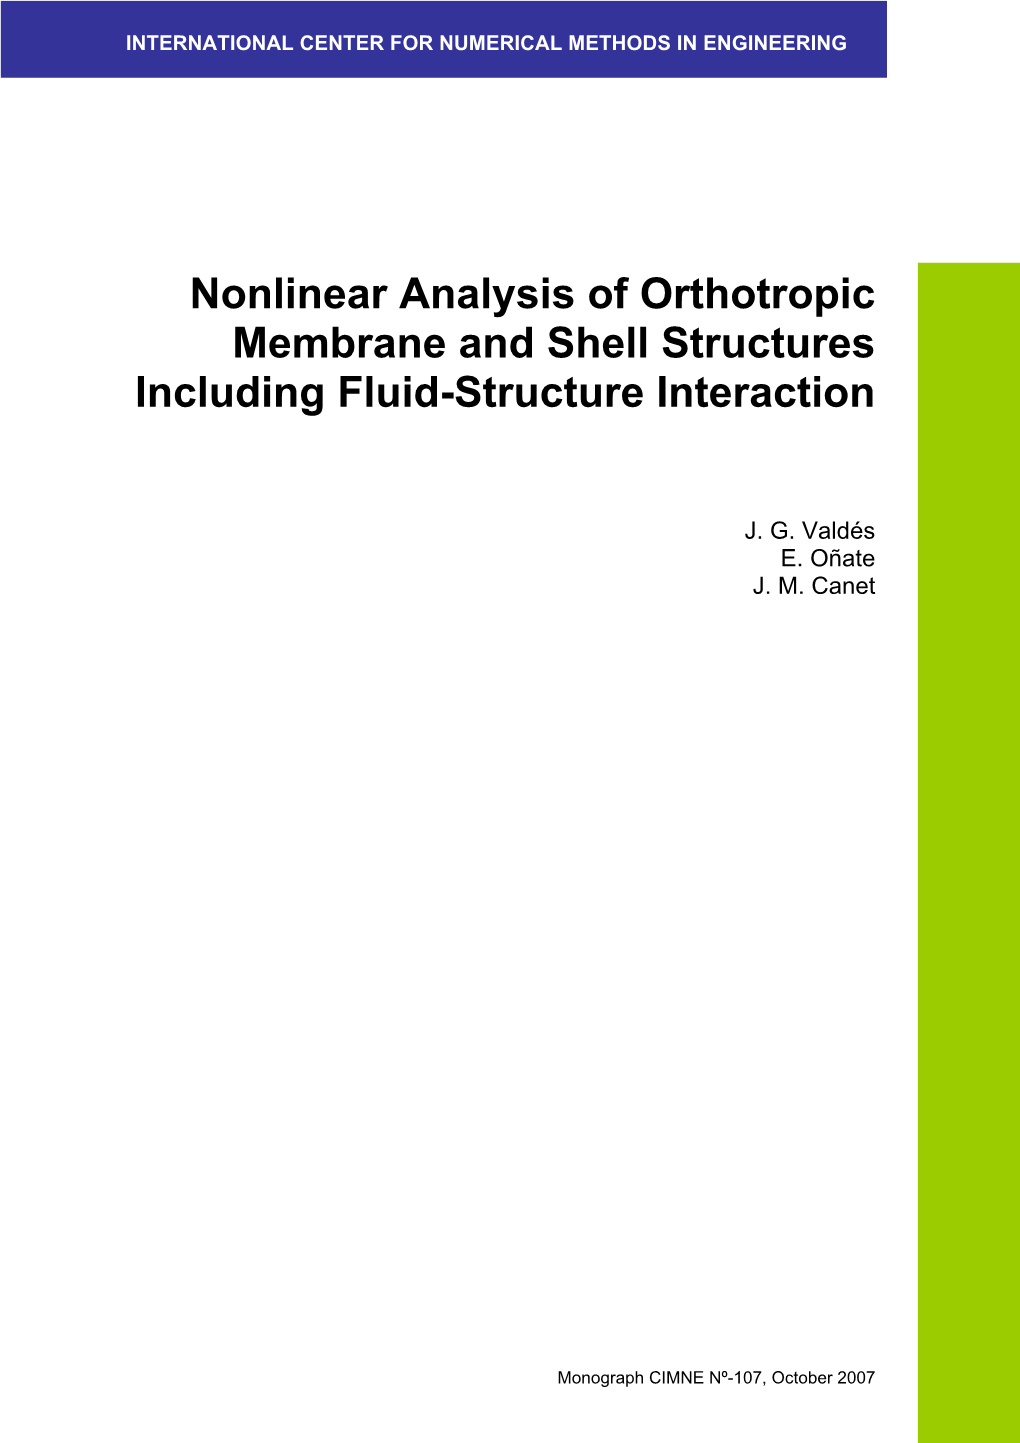 Nonlinear Analysis of Orthotropic Membrane and Shell Structures Including Fluid-Structure Interaction